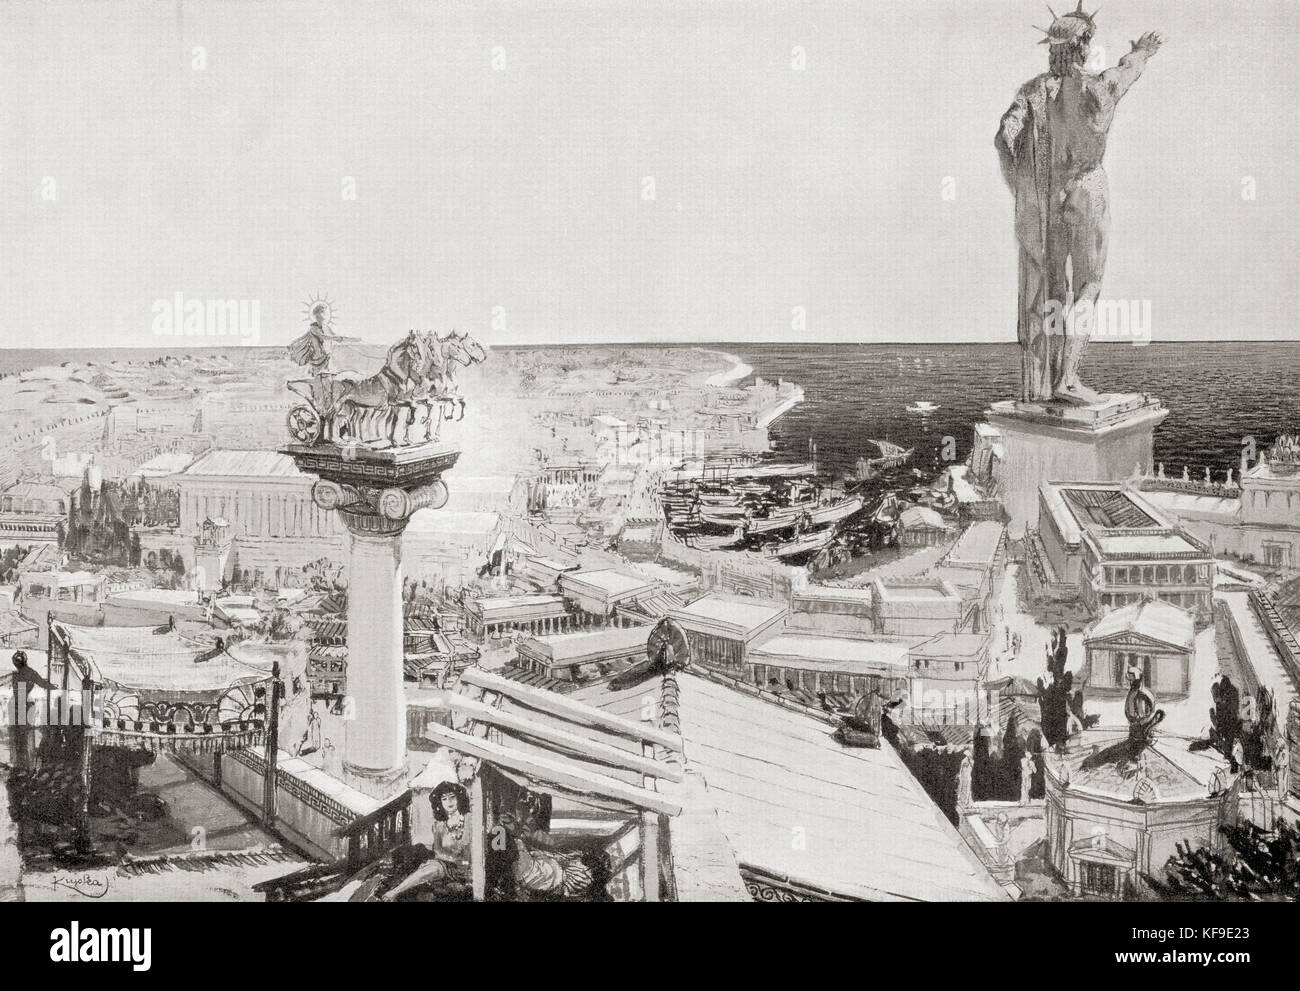 The Colossus of Rhodes.  A statue of the Greek titan-god of the sun Helios, erected in the city of Rhodes, Greece by Chares of Lindos in 280 BC. One of the Seven Wonders of the Ancient World.  From Hutchinson's History of the Nations, published 1915. Stock Photo